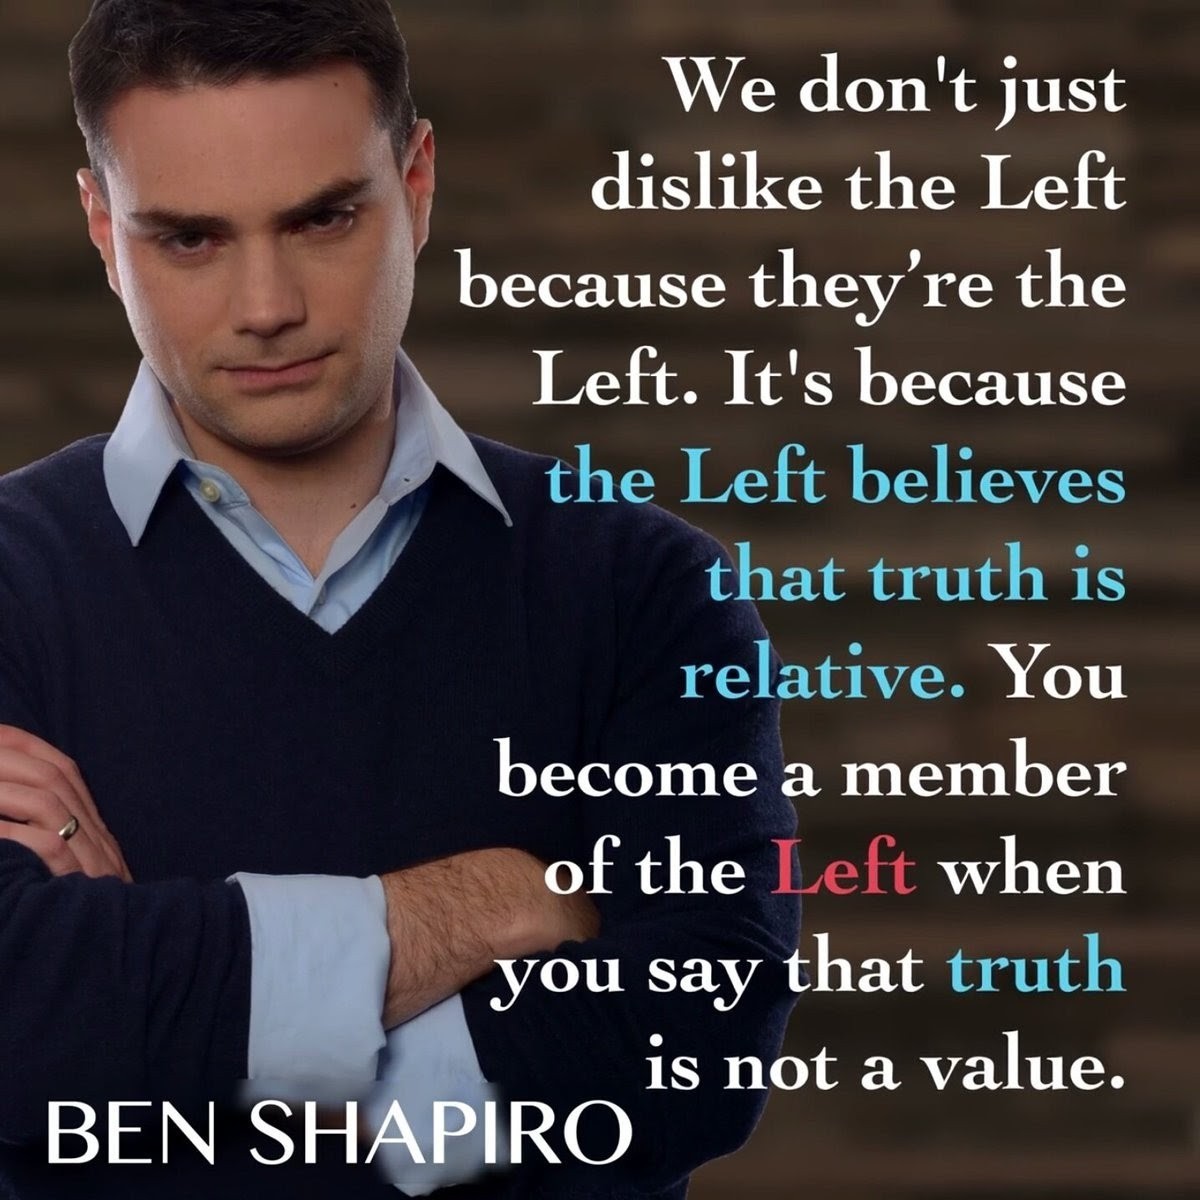 memes - ben shapiro quotes on truth - We don't just dis the Left because they're the Left. It's because the Left believes that truth is relative. You become a member of the Left when you say that truth is not a value. Ben Shapiro